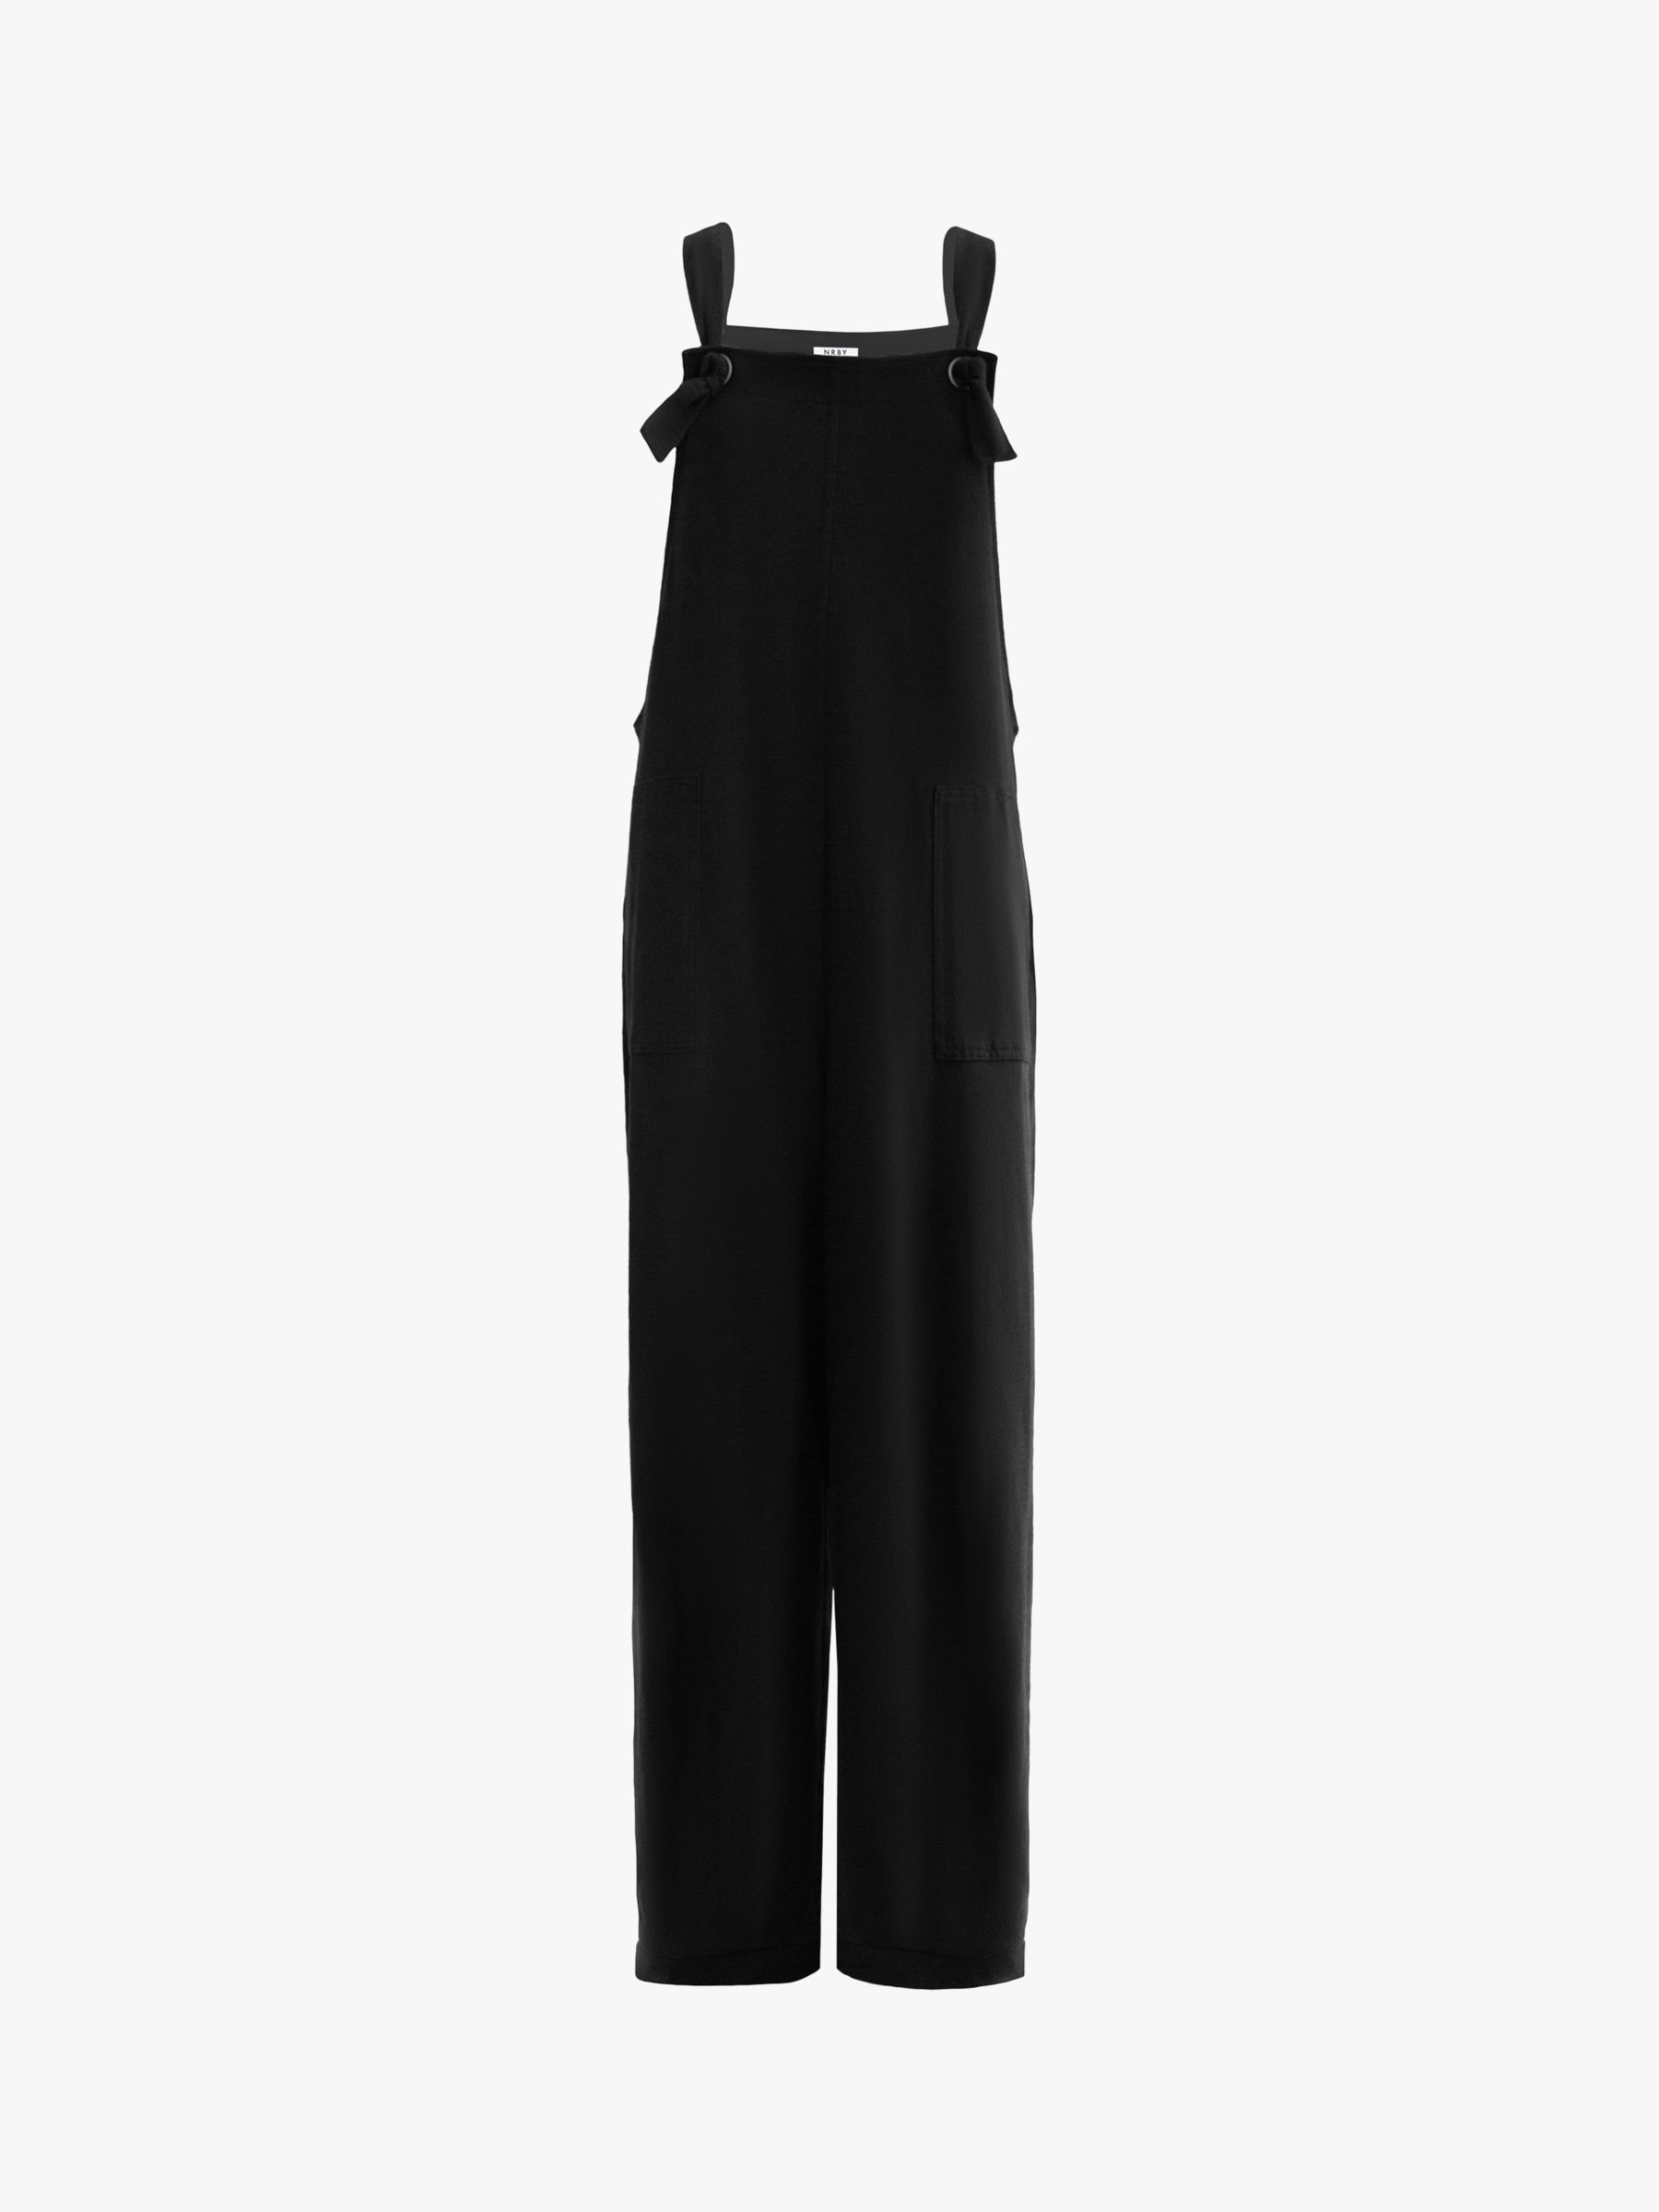 NRBY Cameron Jersey Dungaree, Black, S